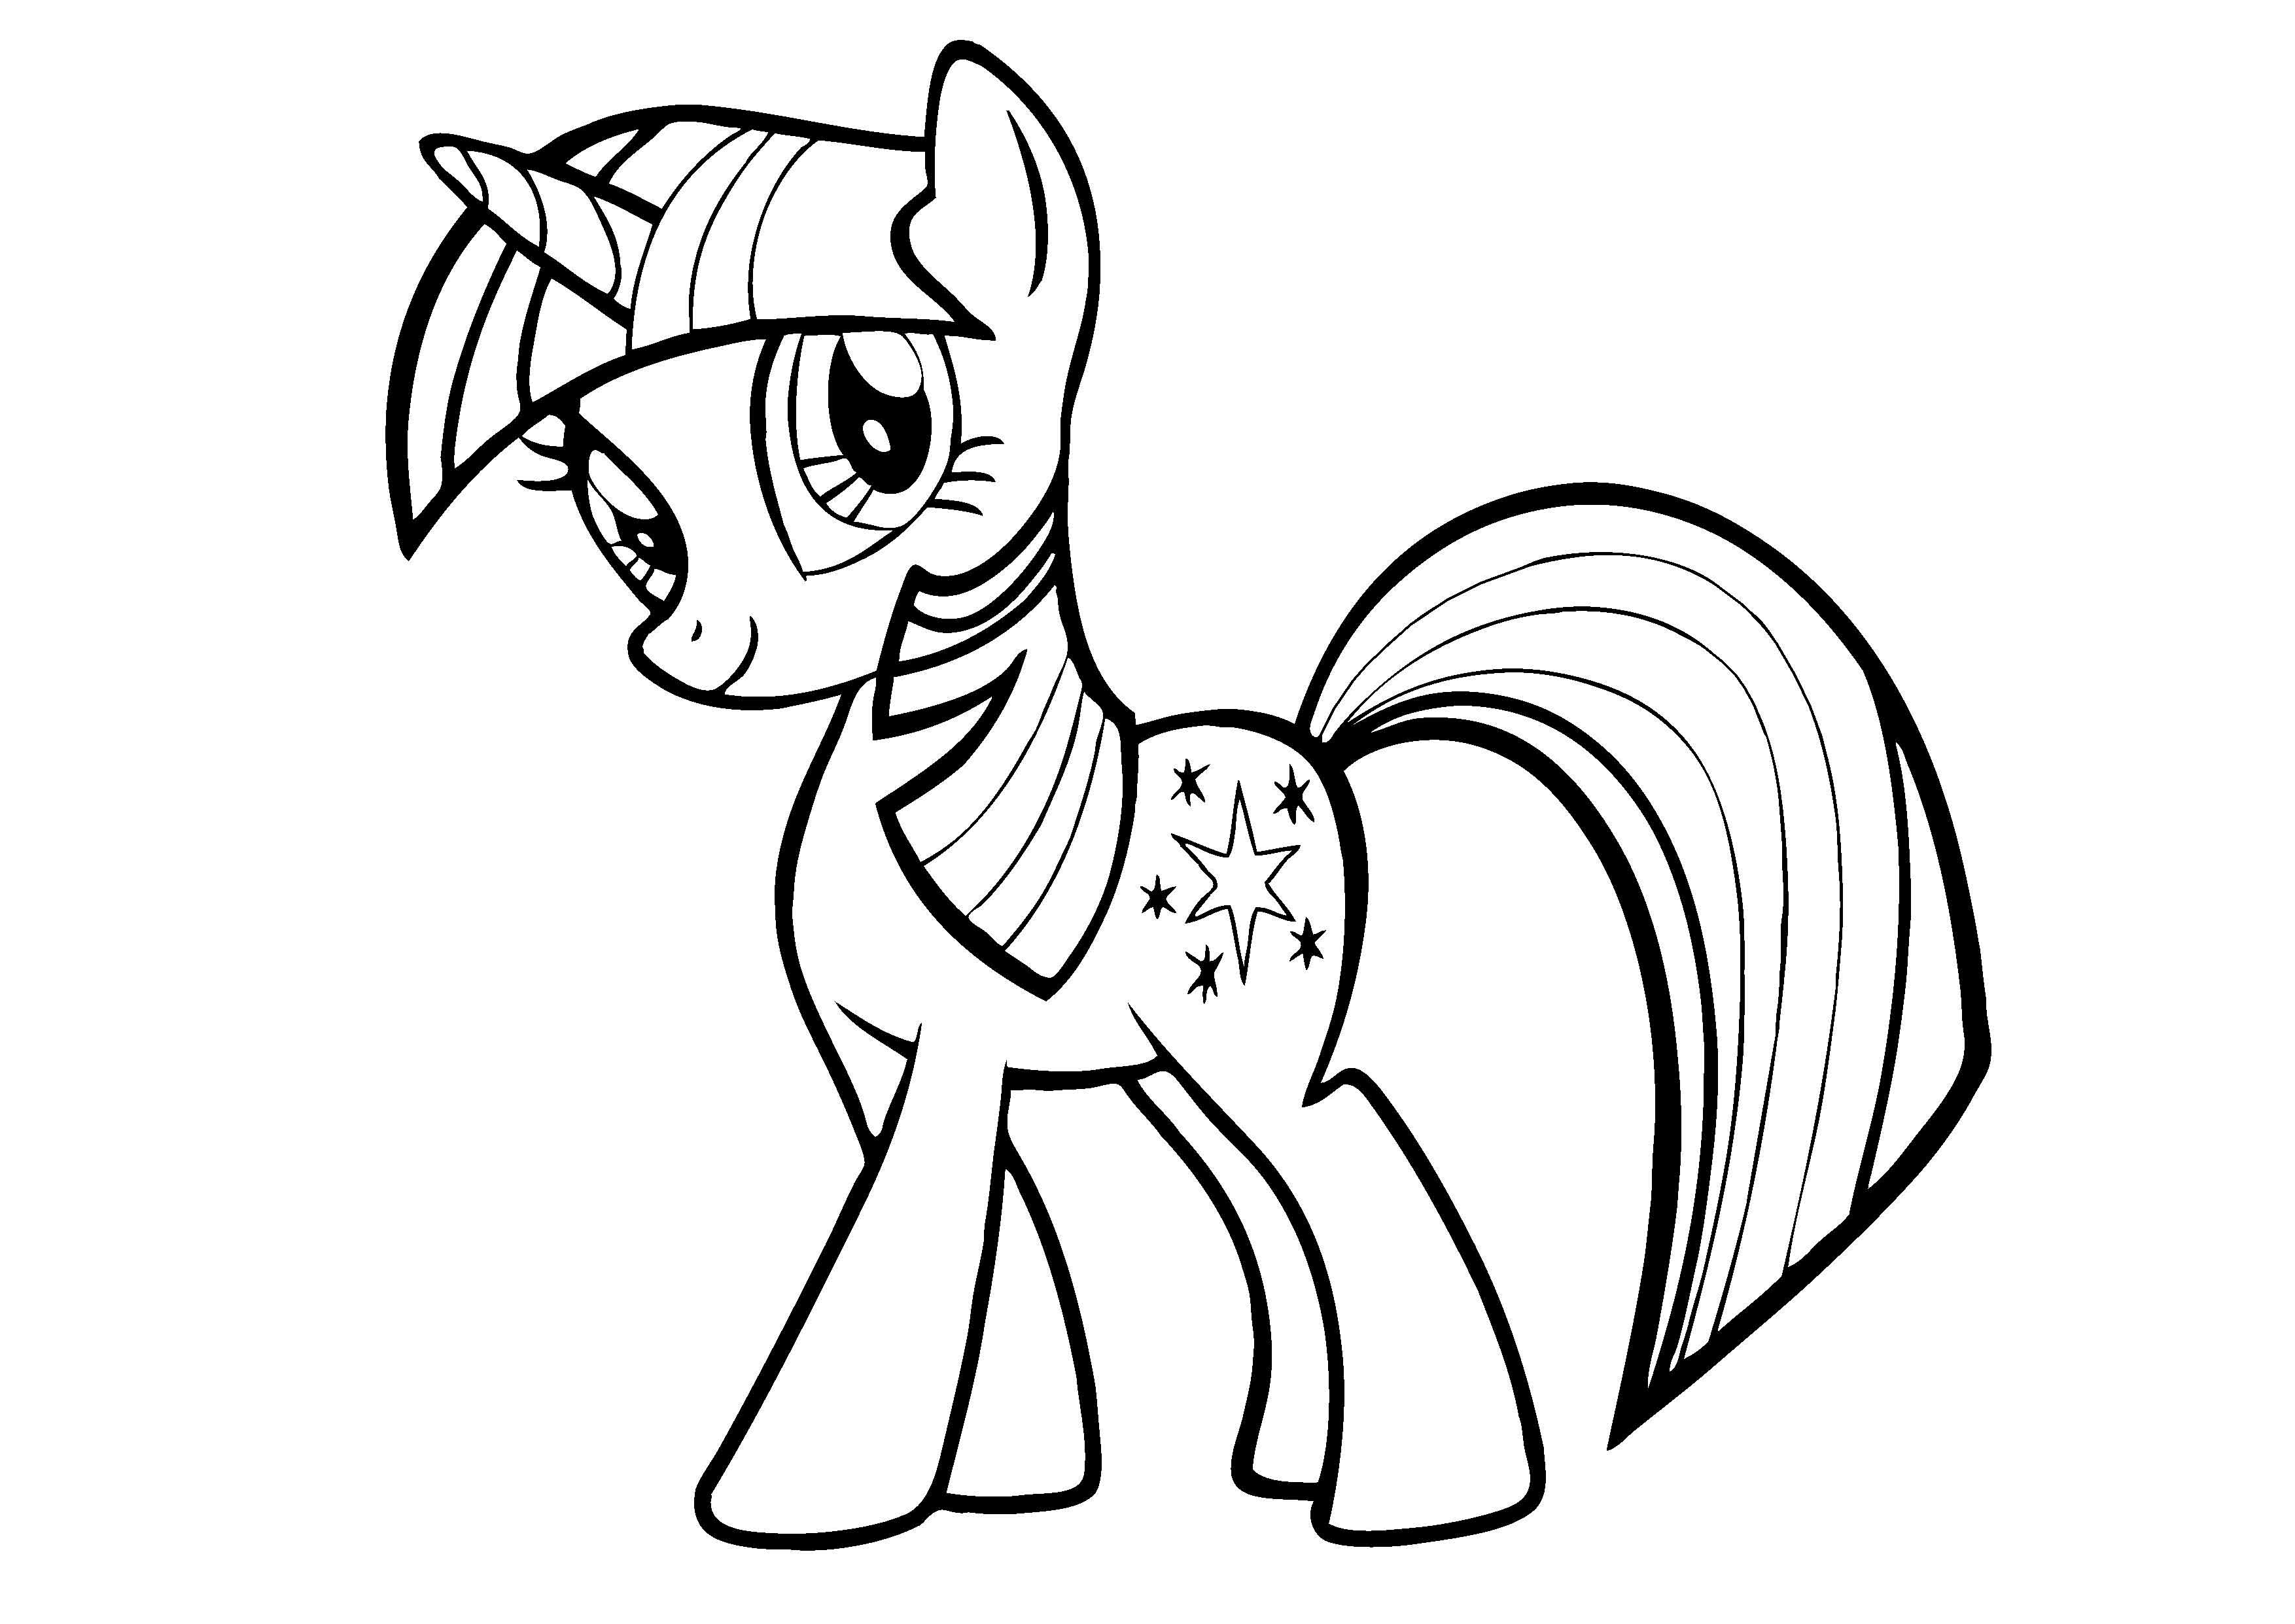 Mlp Coloring Pages Rarity Awesome Coloring Pages My Little Pony P6iy9amcn Rarity Shine Bright